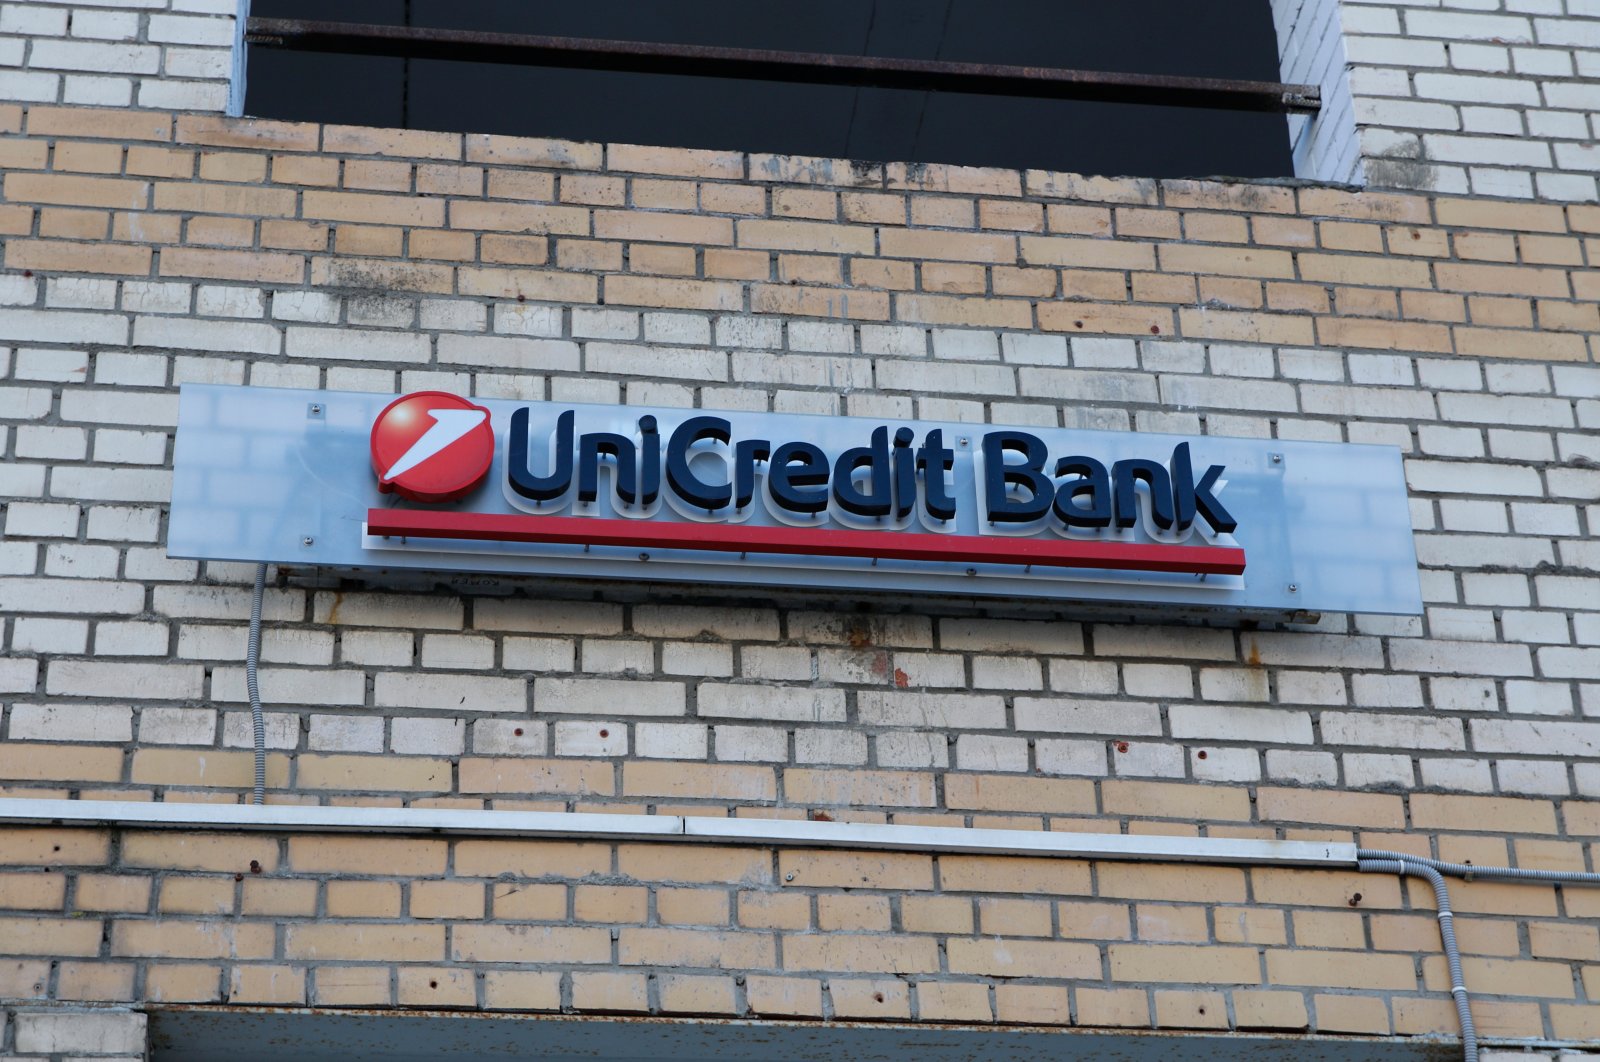 UniCredit Bank logo is seen on a residential building in Saint Petersburg, Russia, Feb. 27, 2022. (Reuters Photo)